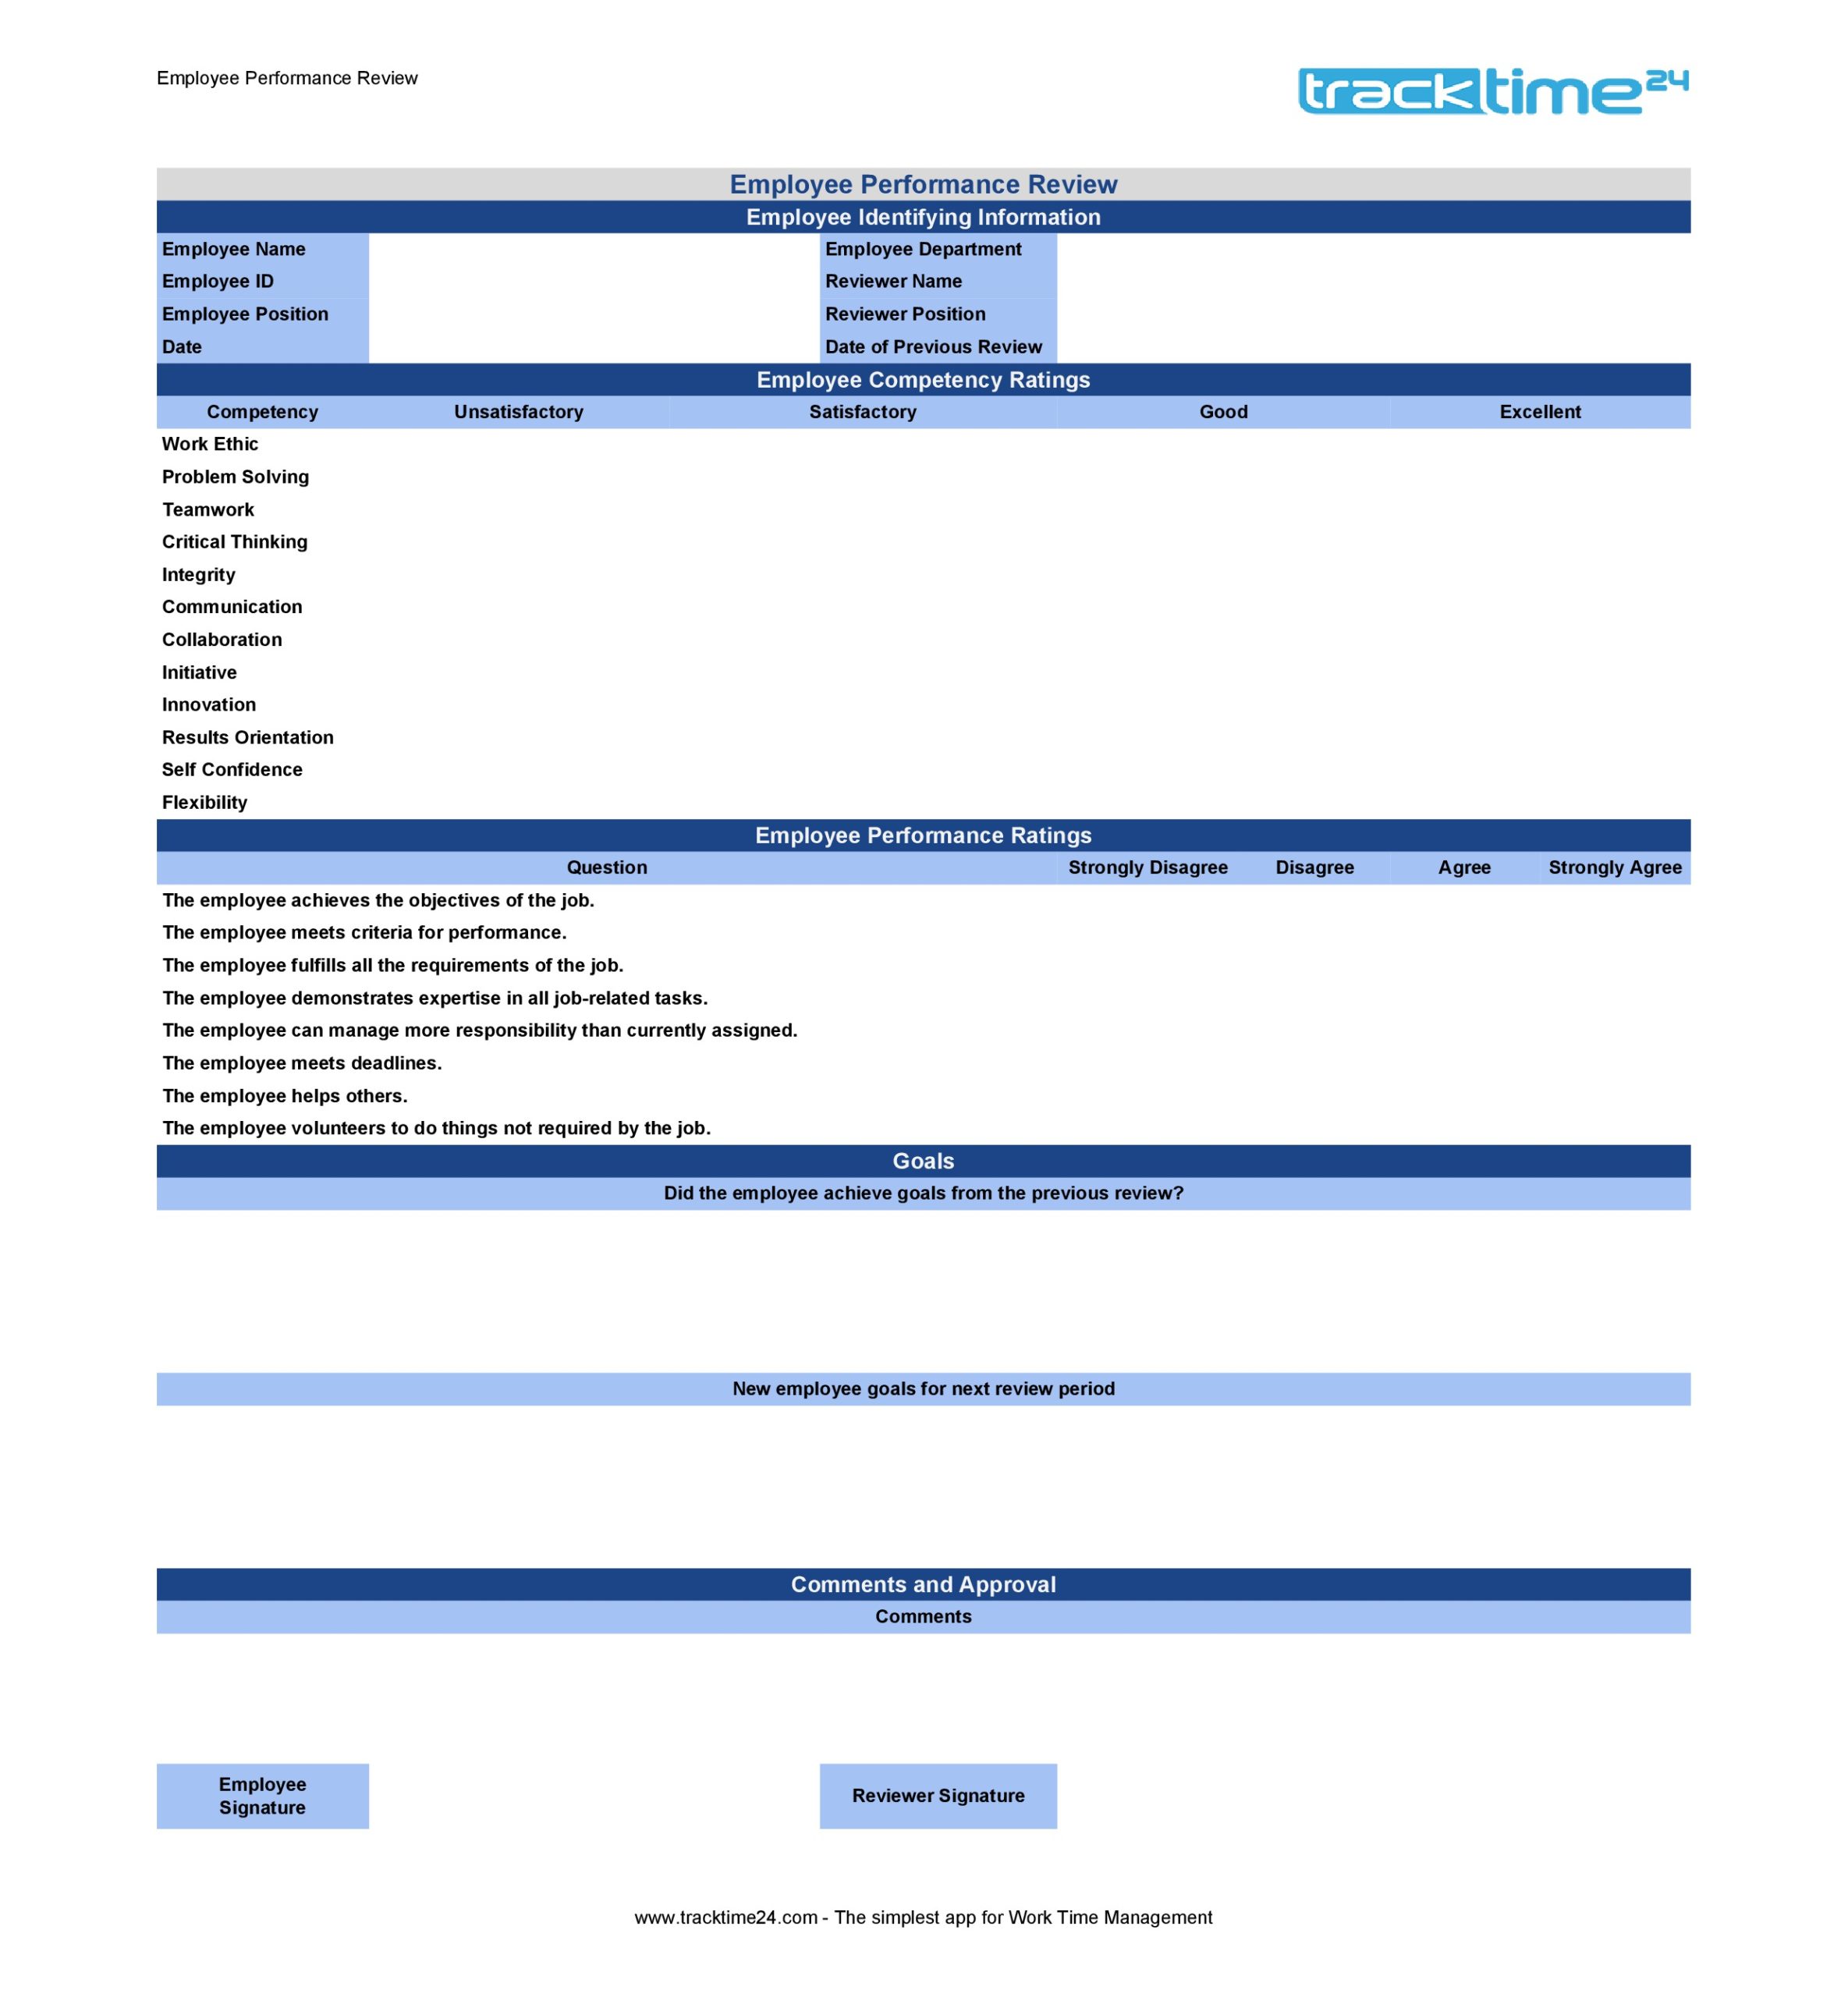 Employees performance review template